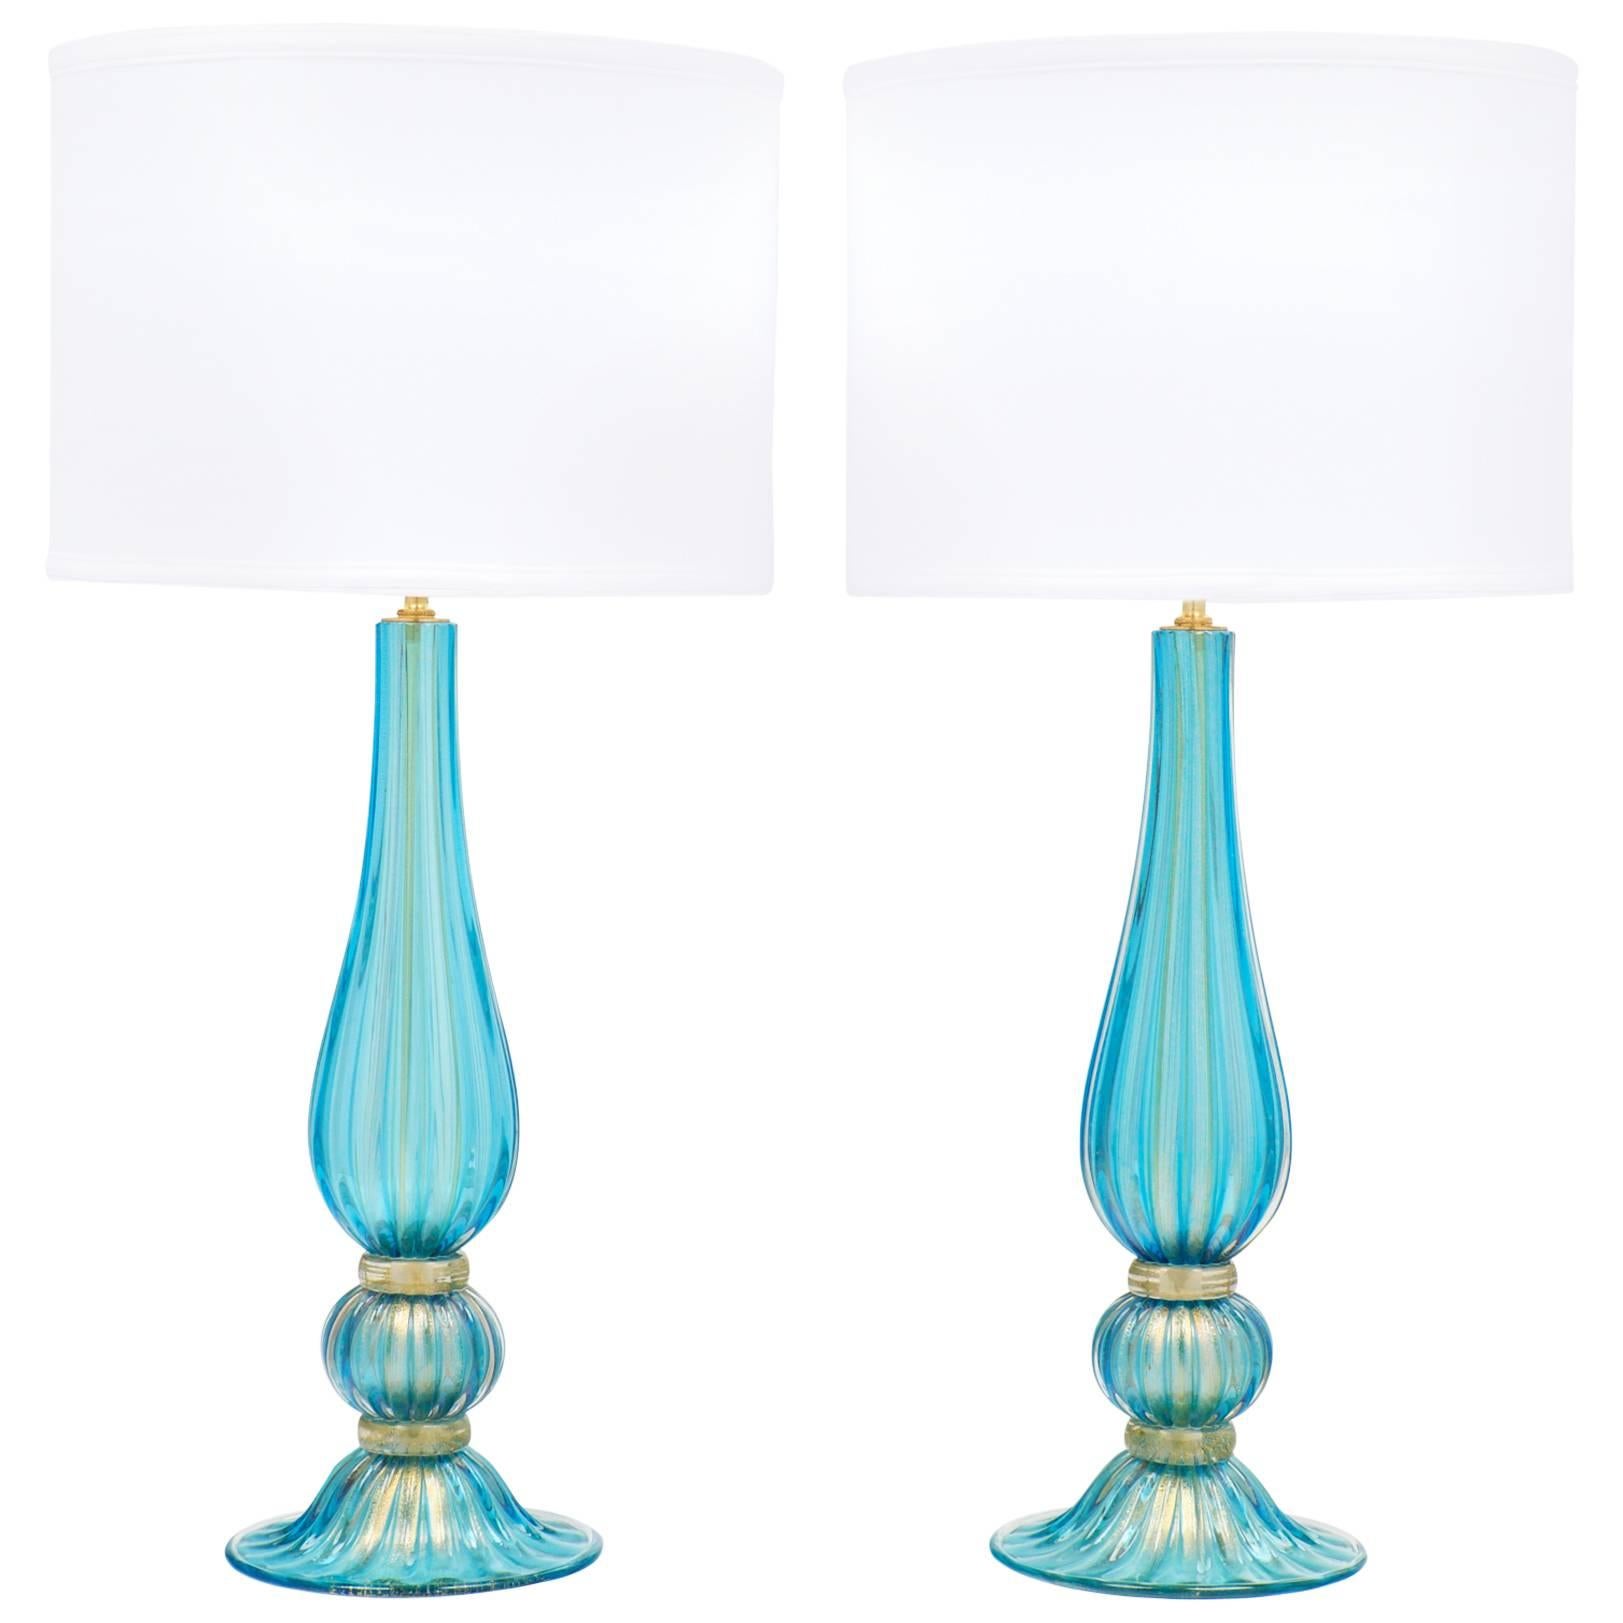 Pair of Gold-Flecked Turquoise Murano Glass Lamps